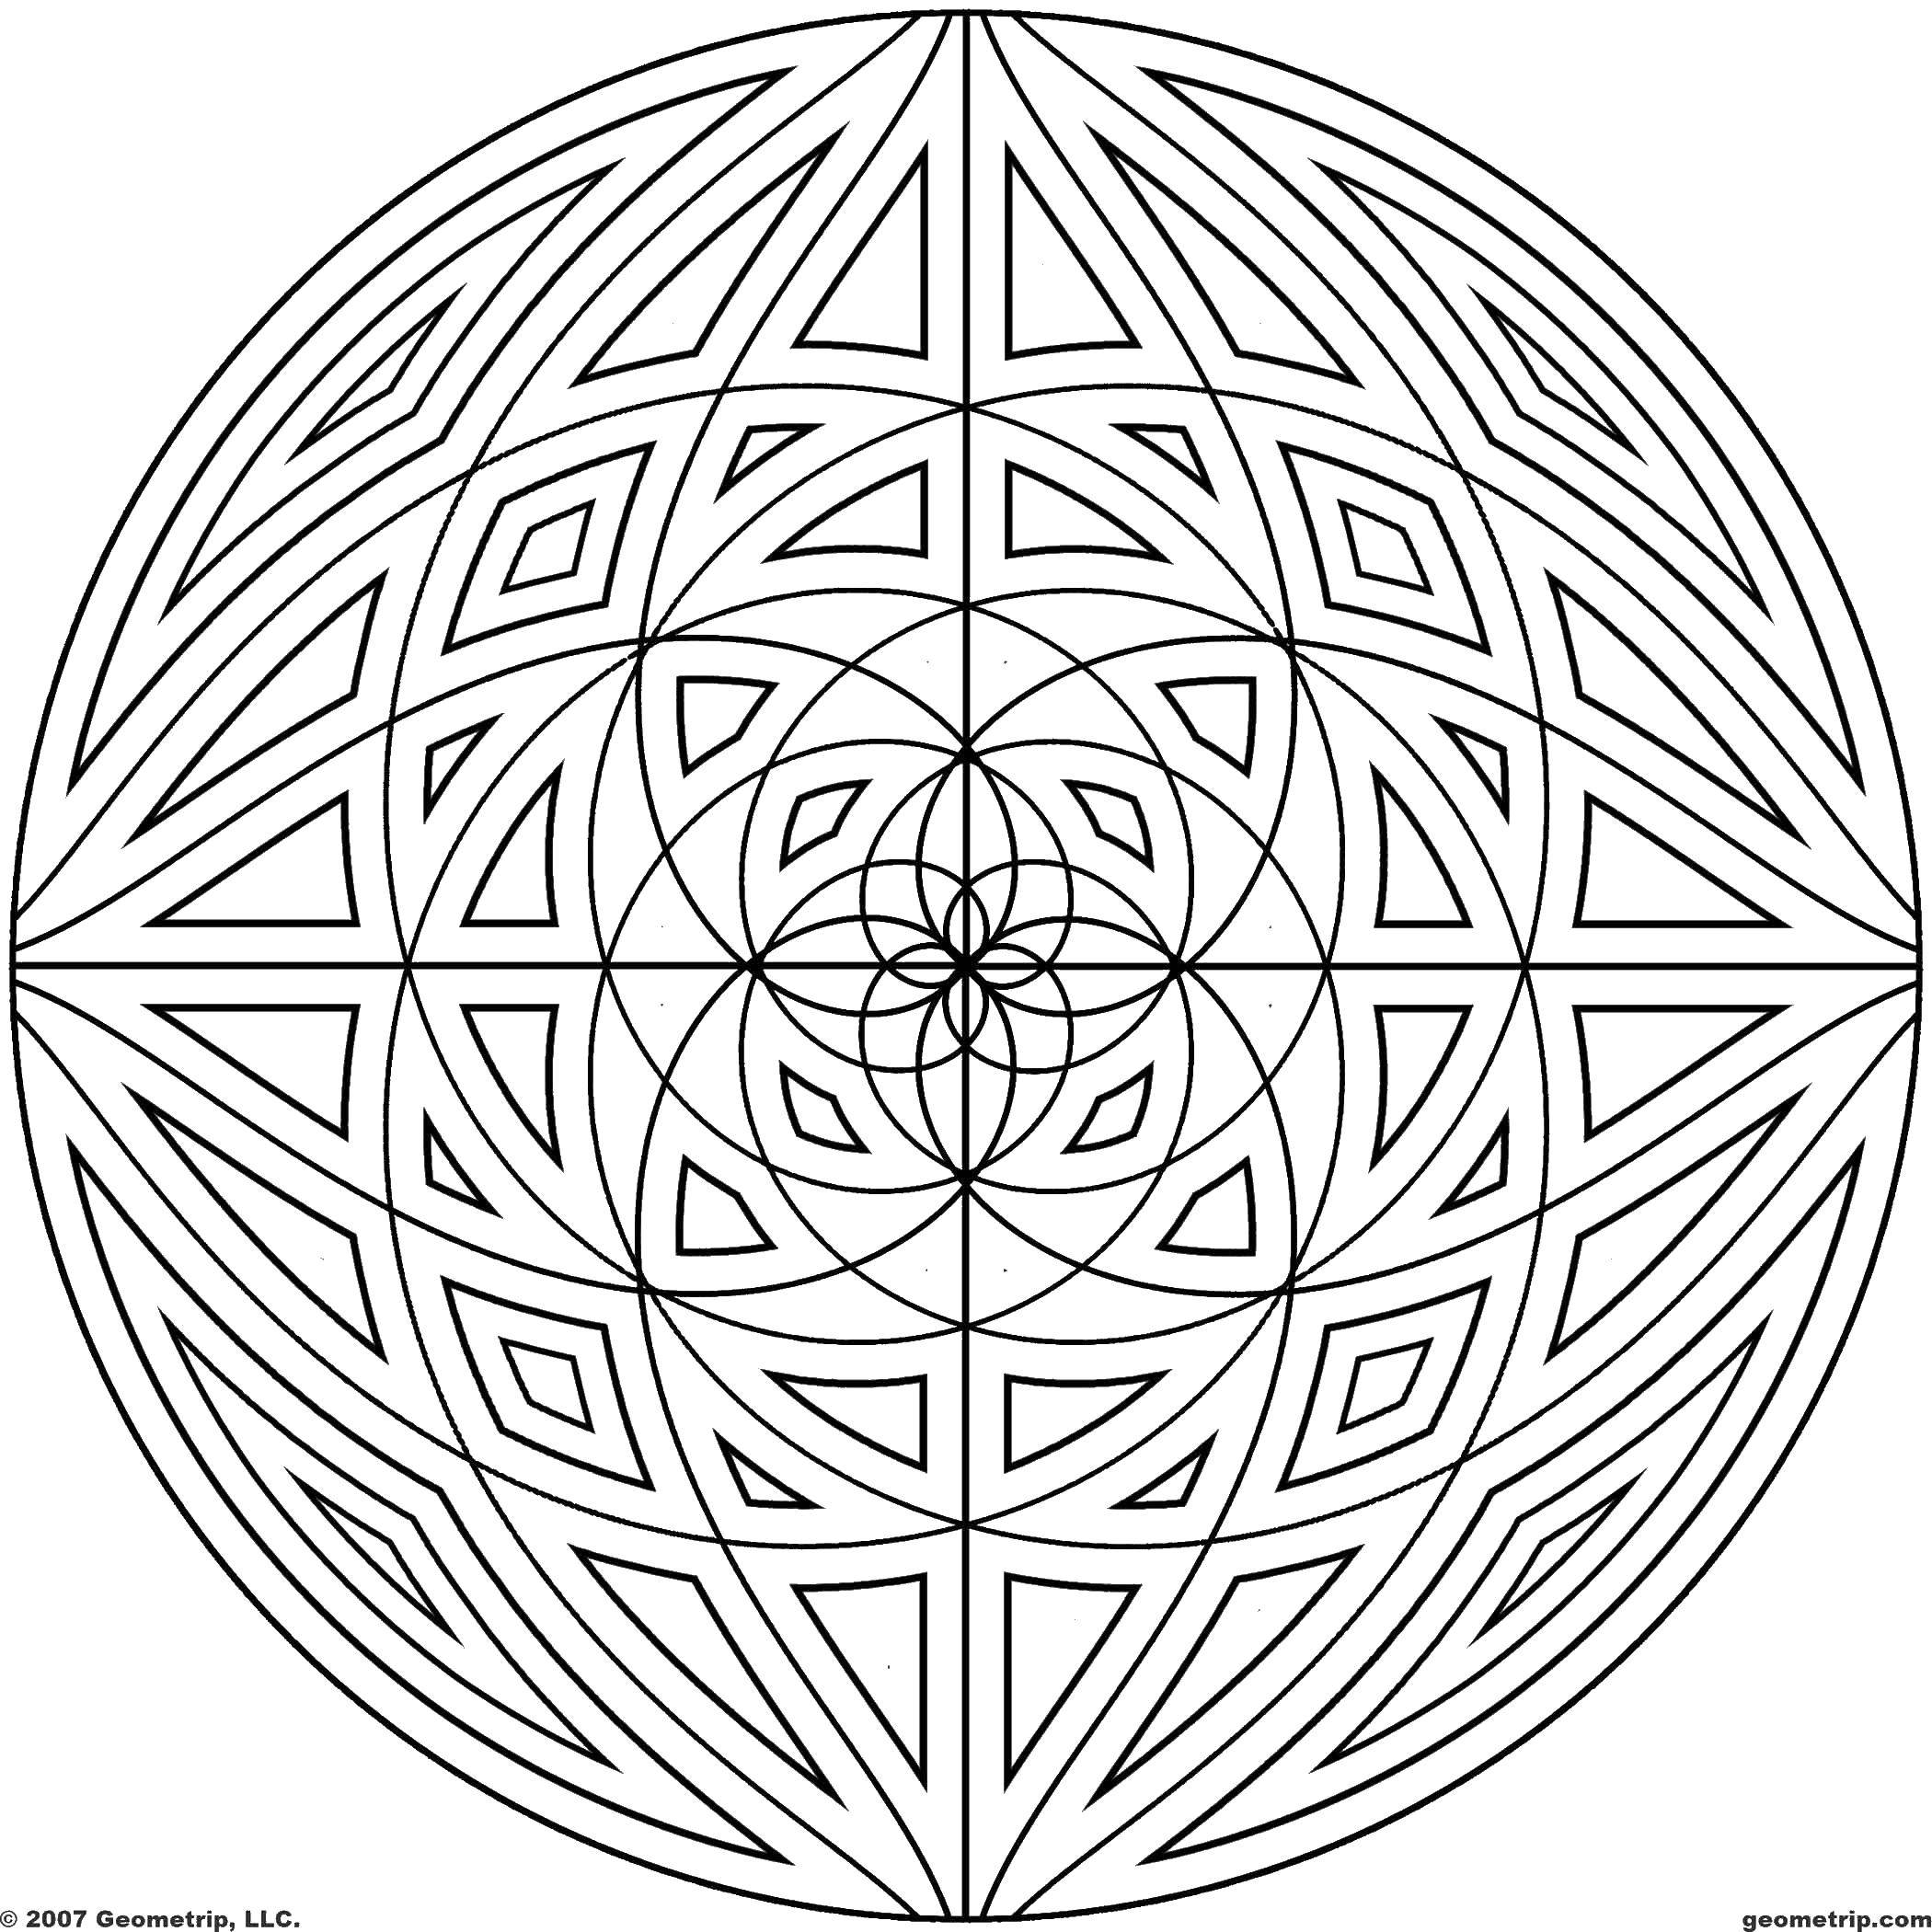 Coloring Patterns in the circle. Category Patterns. Tags:  Patterns, geometric.